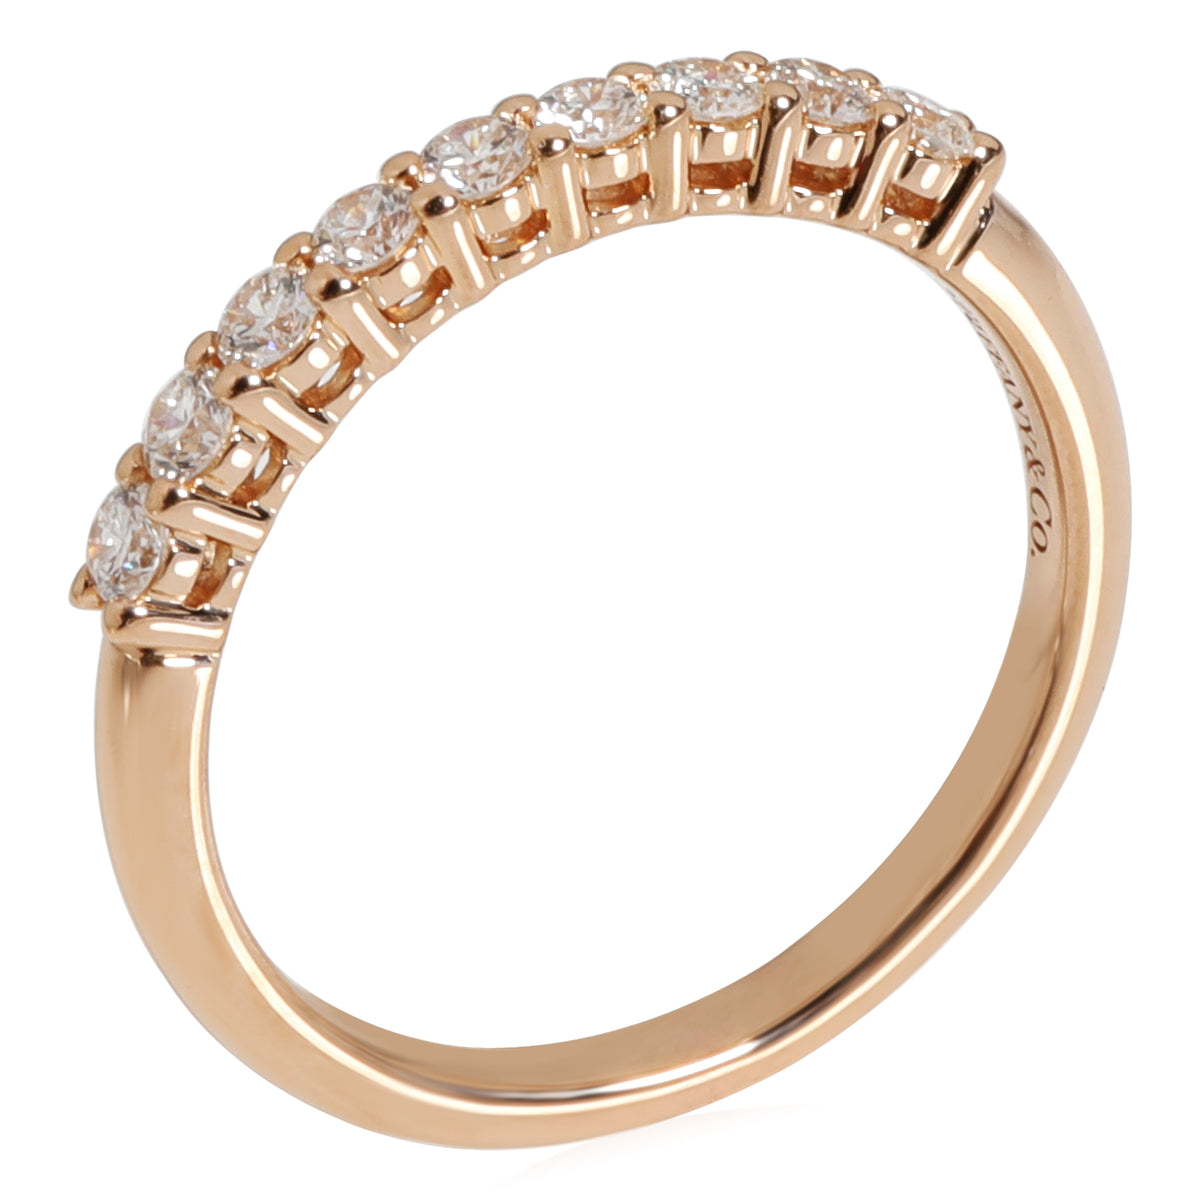 Tiffany Forever Diamond Wedding Band in 18k Rose Gold 0.27 CTW